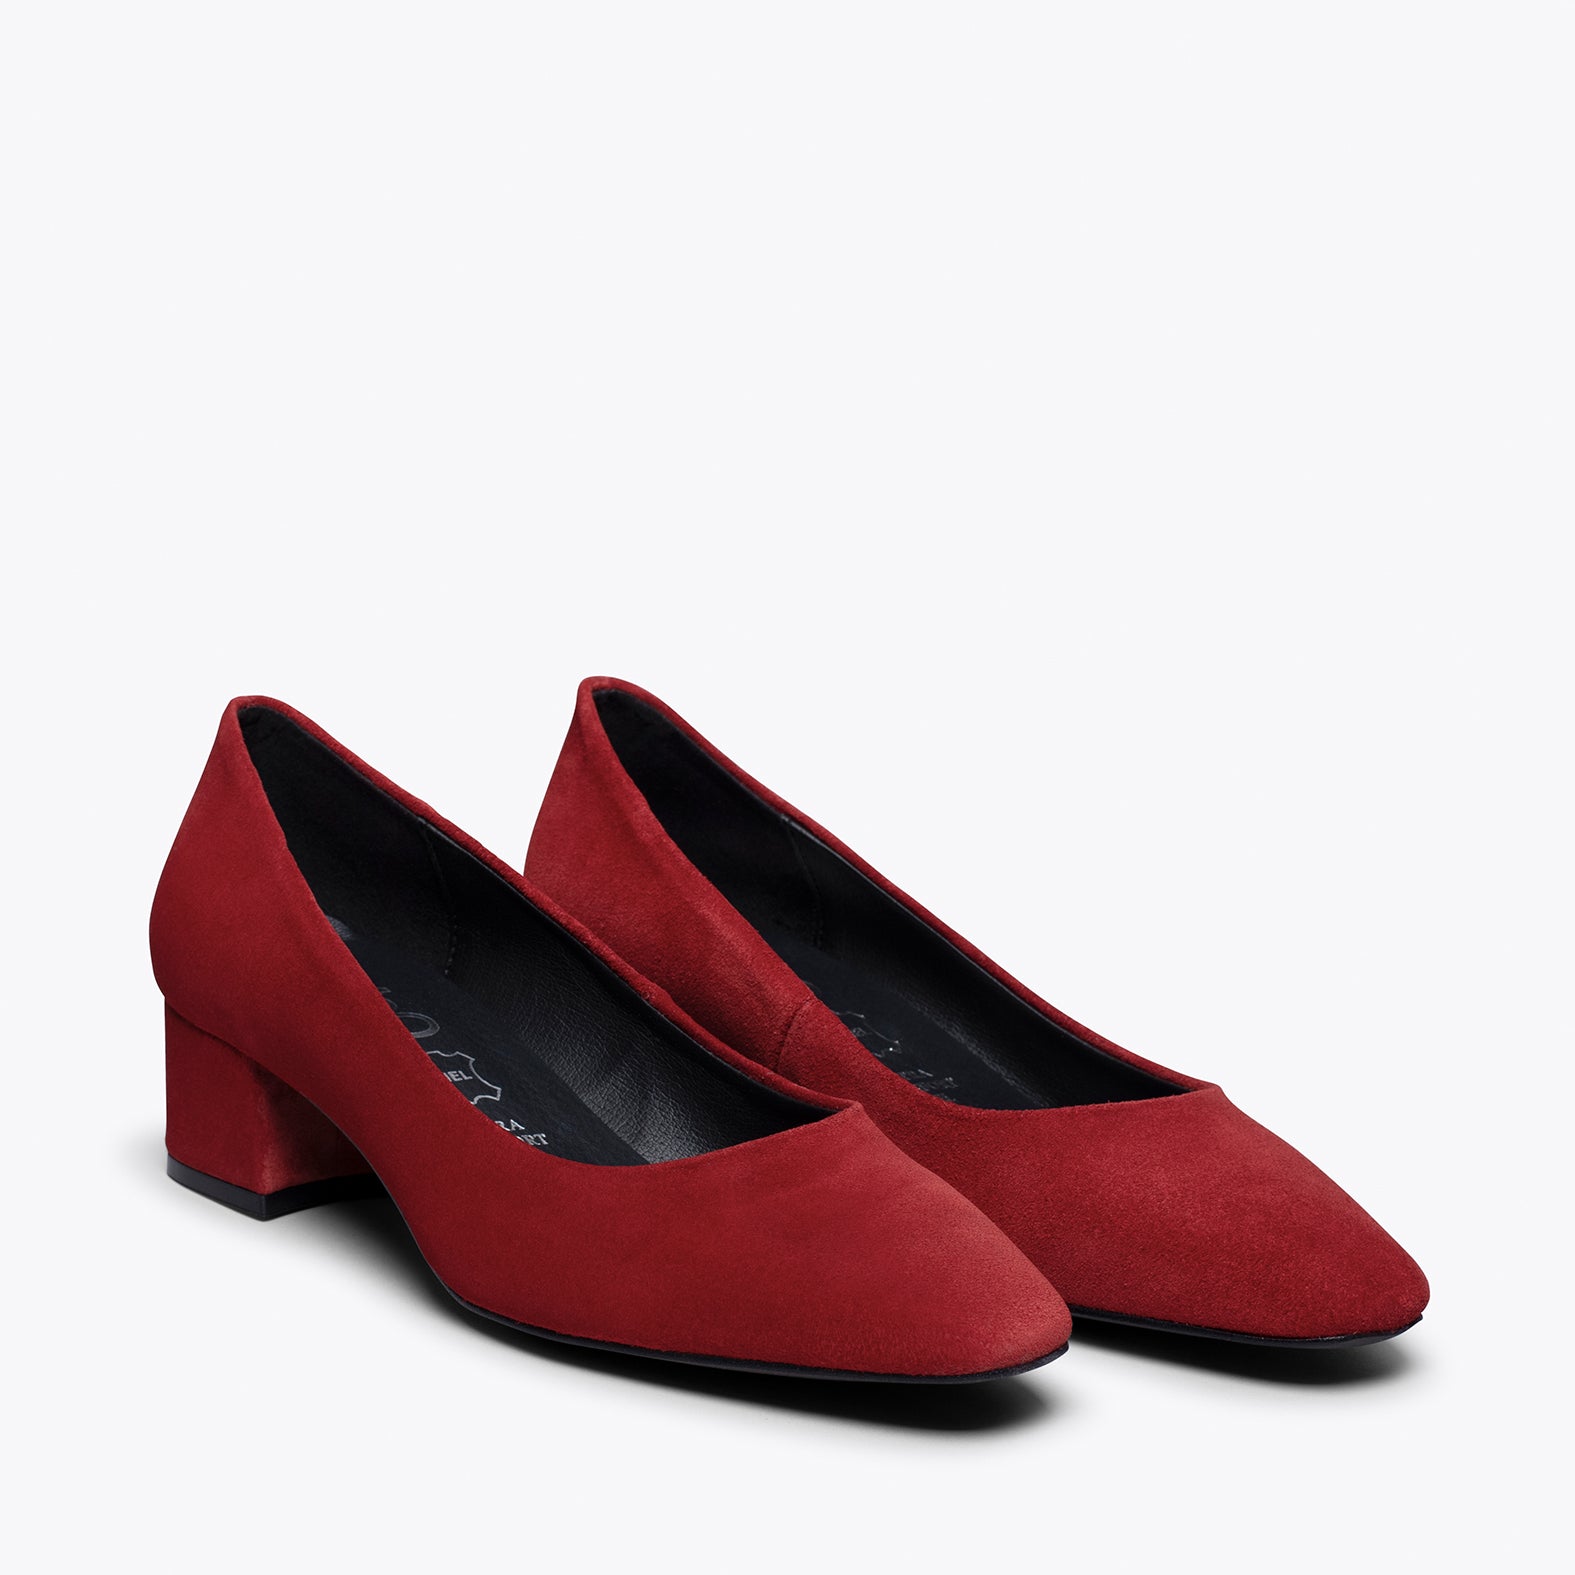 TREND – RED square pointed mid heel